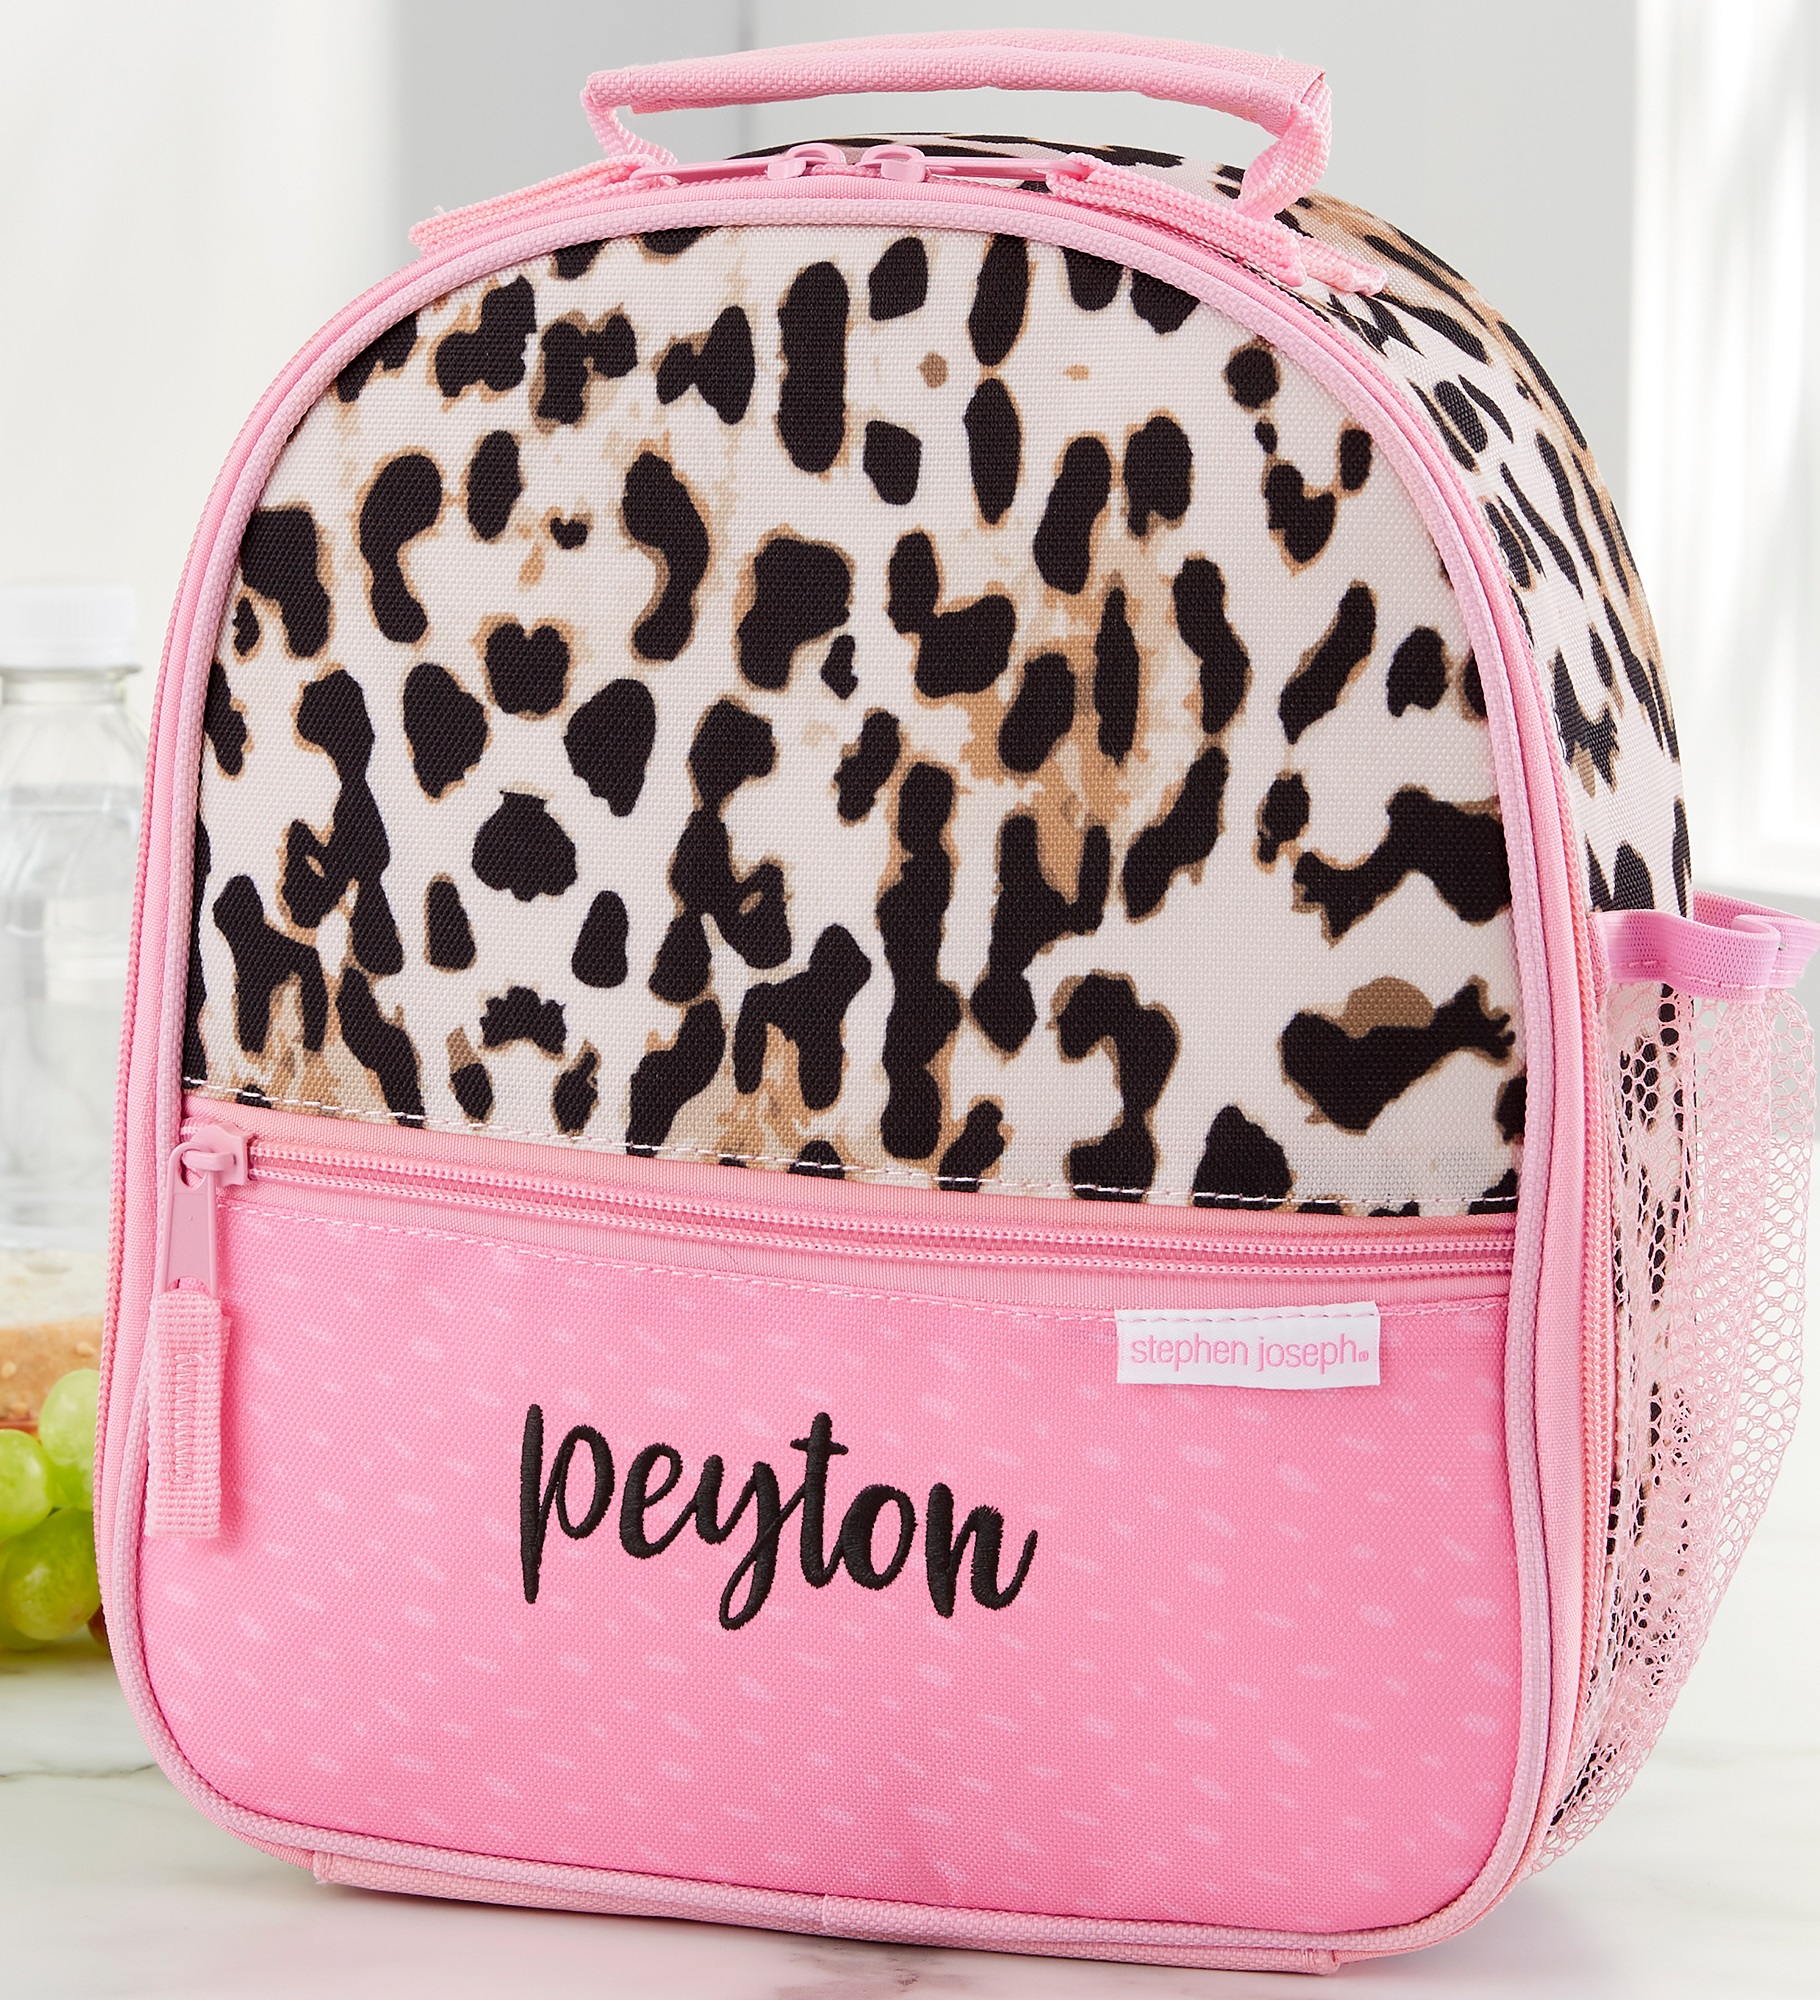 Leopard Print Personalized Lunch Bag by Stephen Joseph